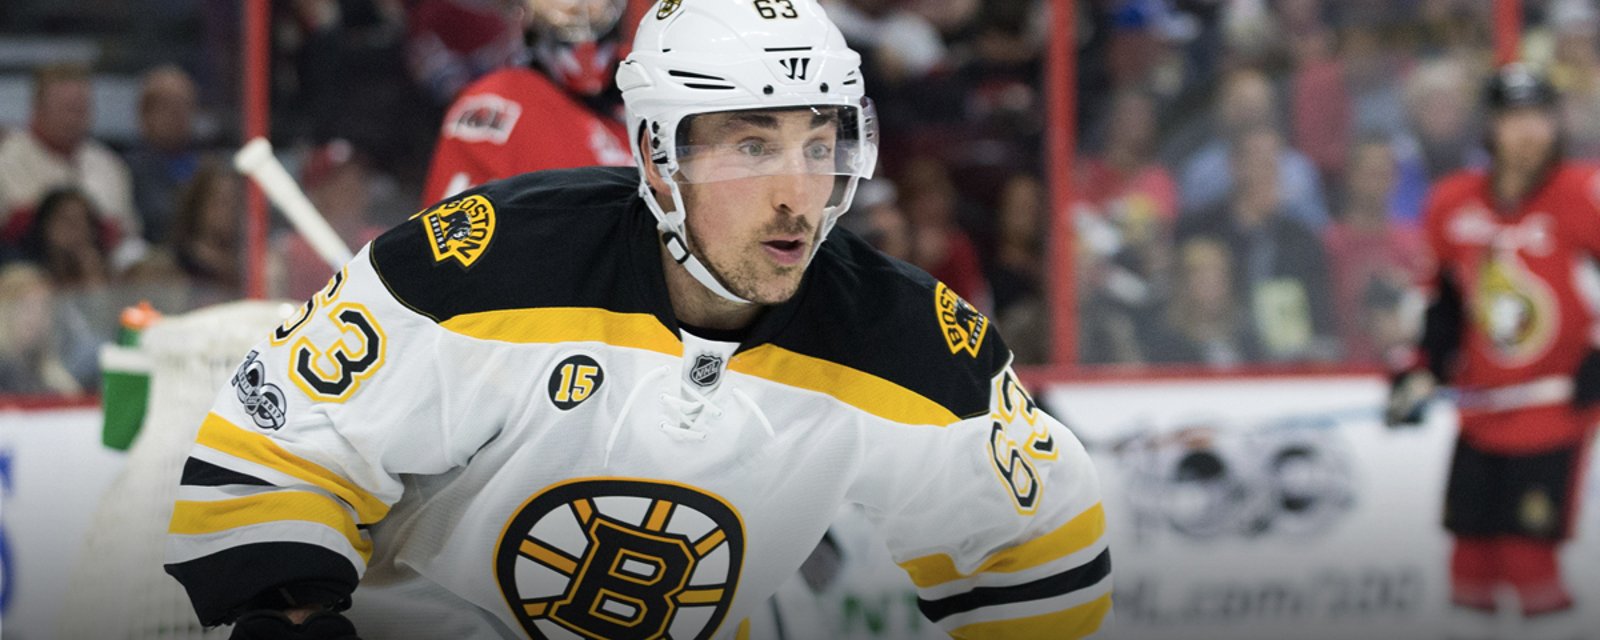 Report: Update on Marchand's injury status